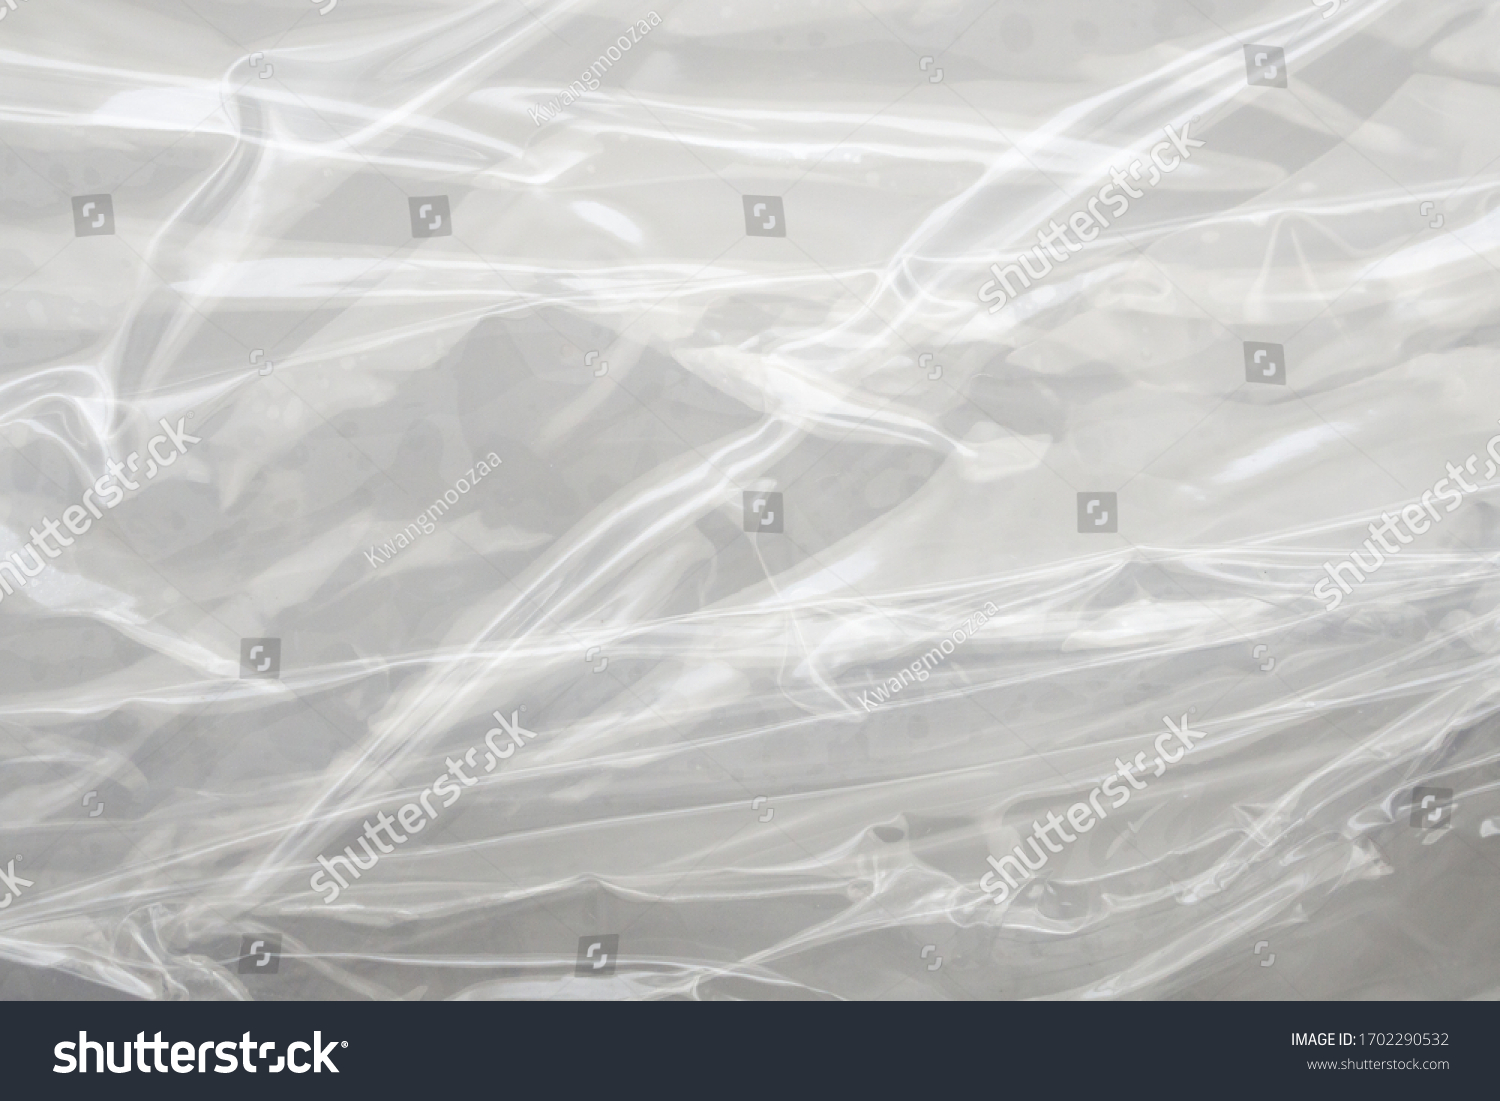 8,614 Plastic film recycling Images, Stock Photos & Vectors | Shutterstock